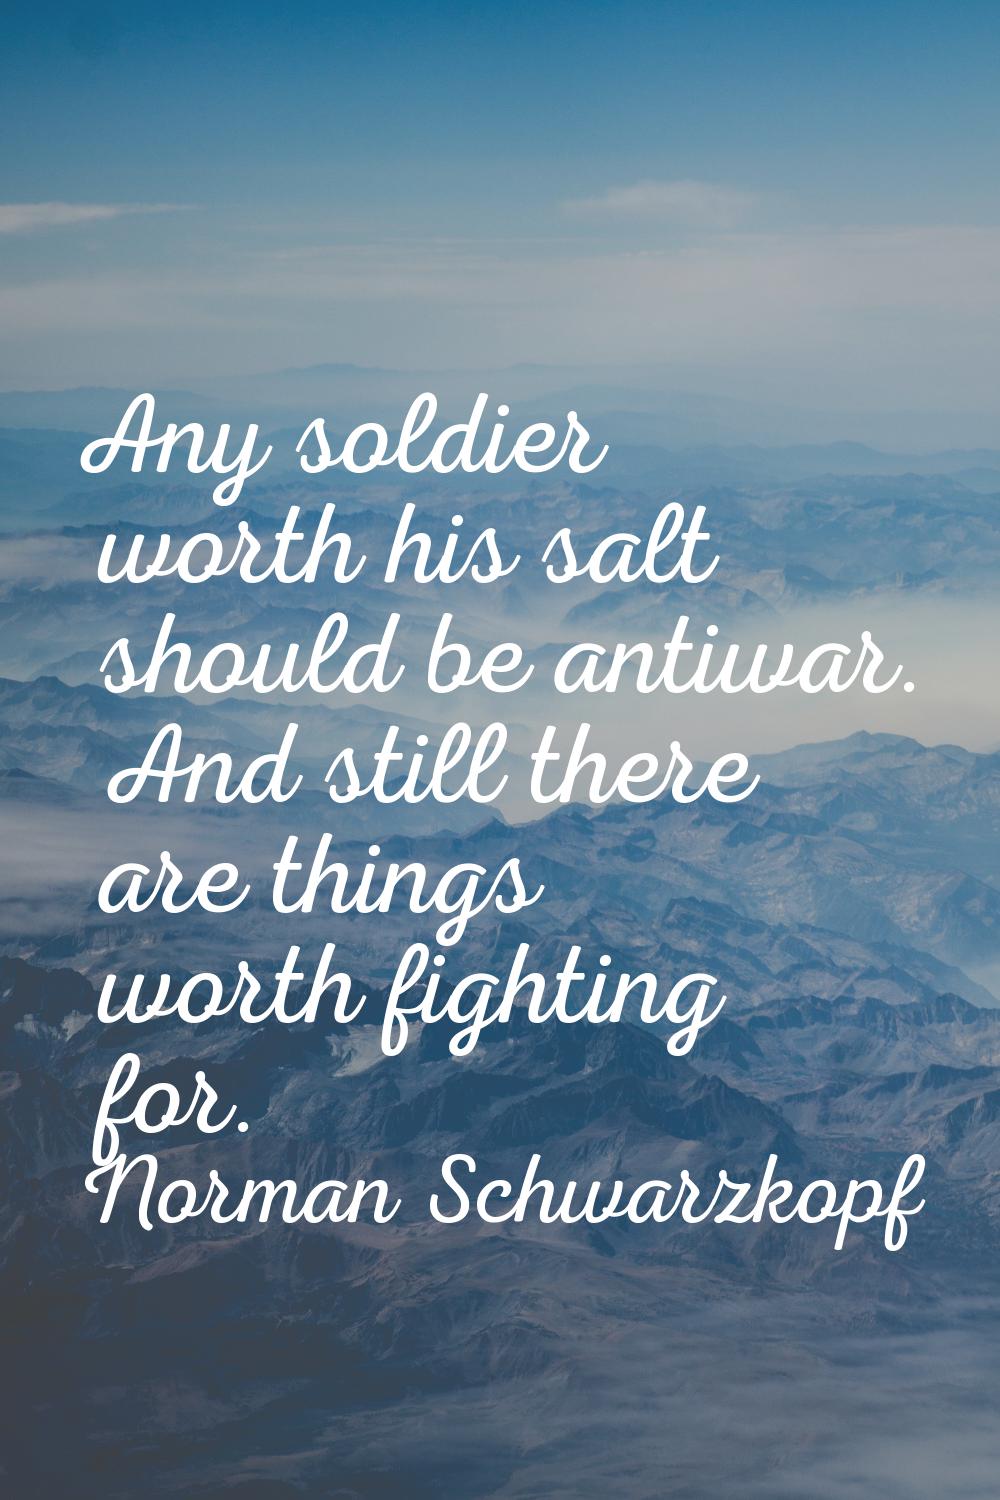 Any soldier worth his salt should be antiwar. And still there are things worth fighting for.